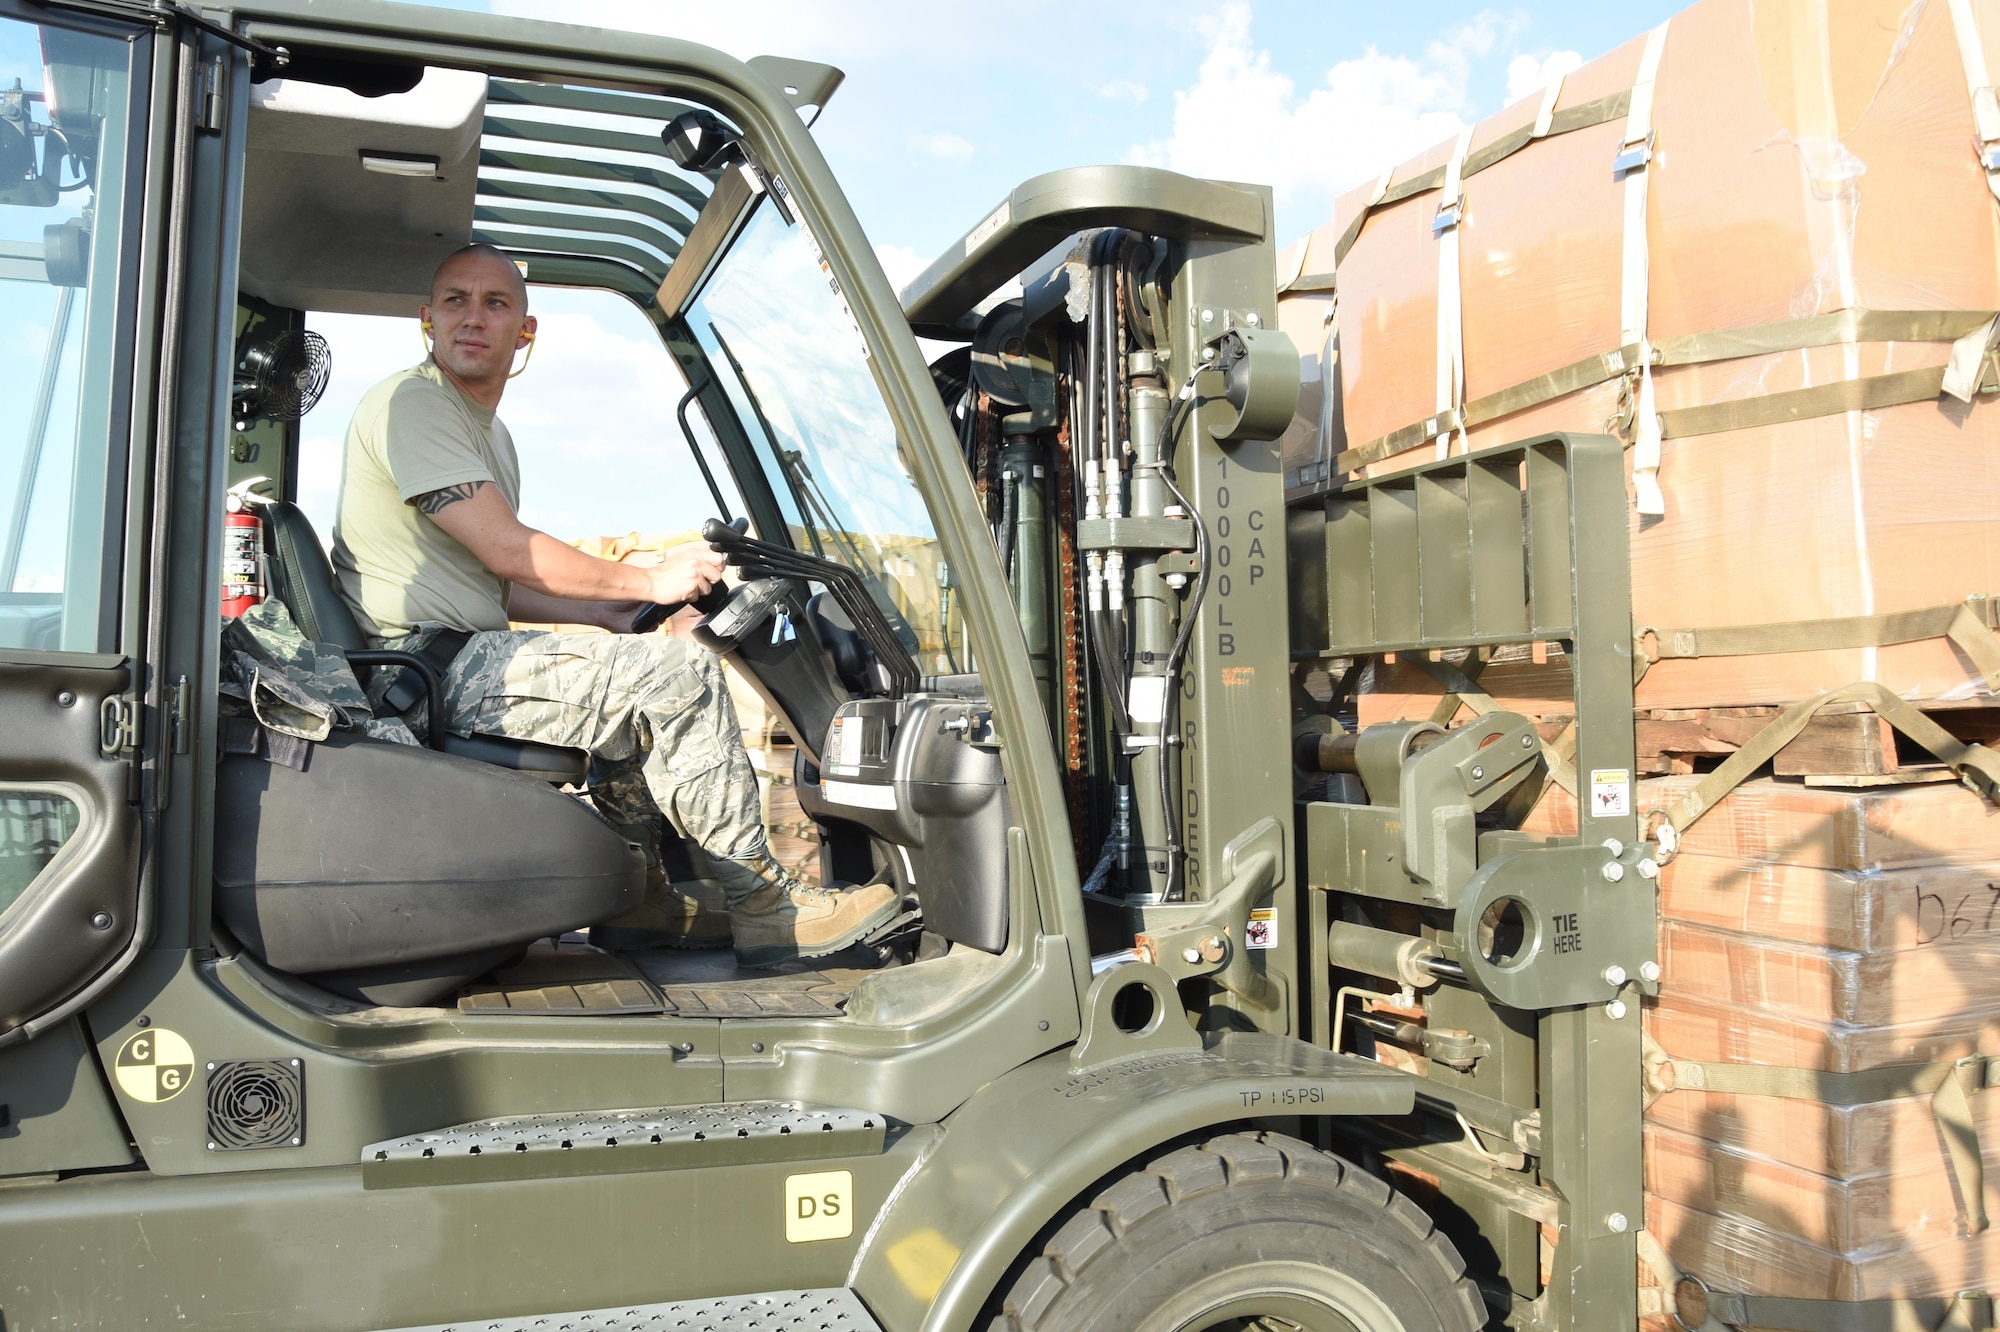 Air Force Senior Master Sgt. Landon Bonds, 73rd Aerial Port Squadron operations superintendent, navigates a forklift to load a portion of the 90,000 lbs. of American Red Cross supplies August 29, 2017, at Naval Air Station Fort Worth Joint Reserve Base, Texas, in support of Hurricane Harvey relief efforts. Supplies included blankets and cots and were transported as part of the Defense Support of Civil Authority. Department of Defense provides medium and heavy lift rotary wing assets, along with ground transportation, to move personnel, commodities and equipment within Texas. (U.S. Air Force photo by Ms. Julie Briden-Garcia)